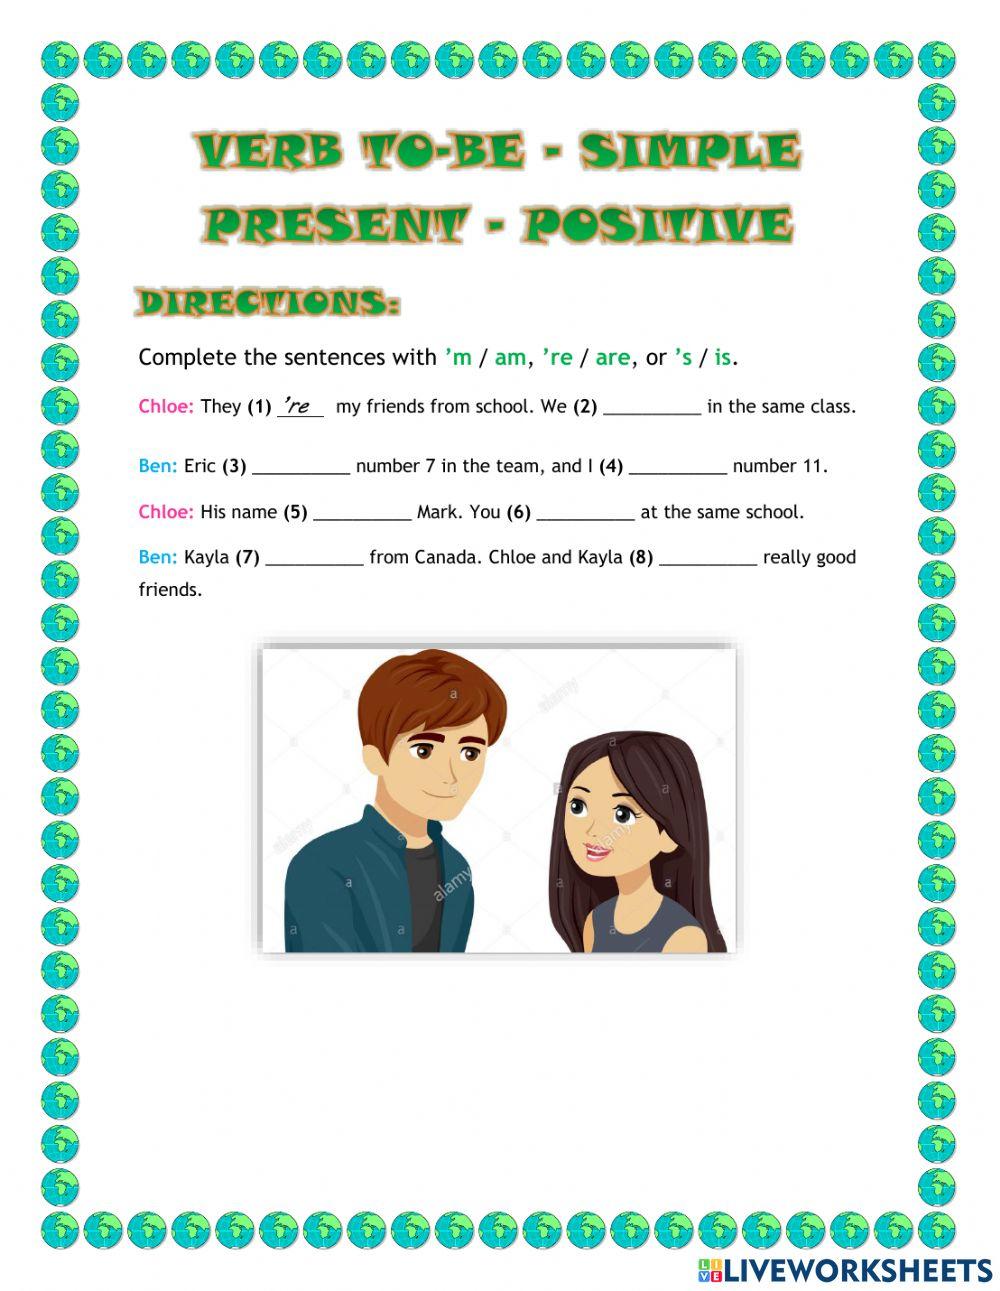 Verb to be (simple present) positive